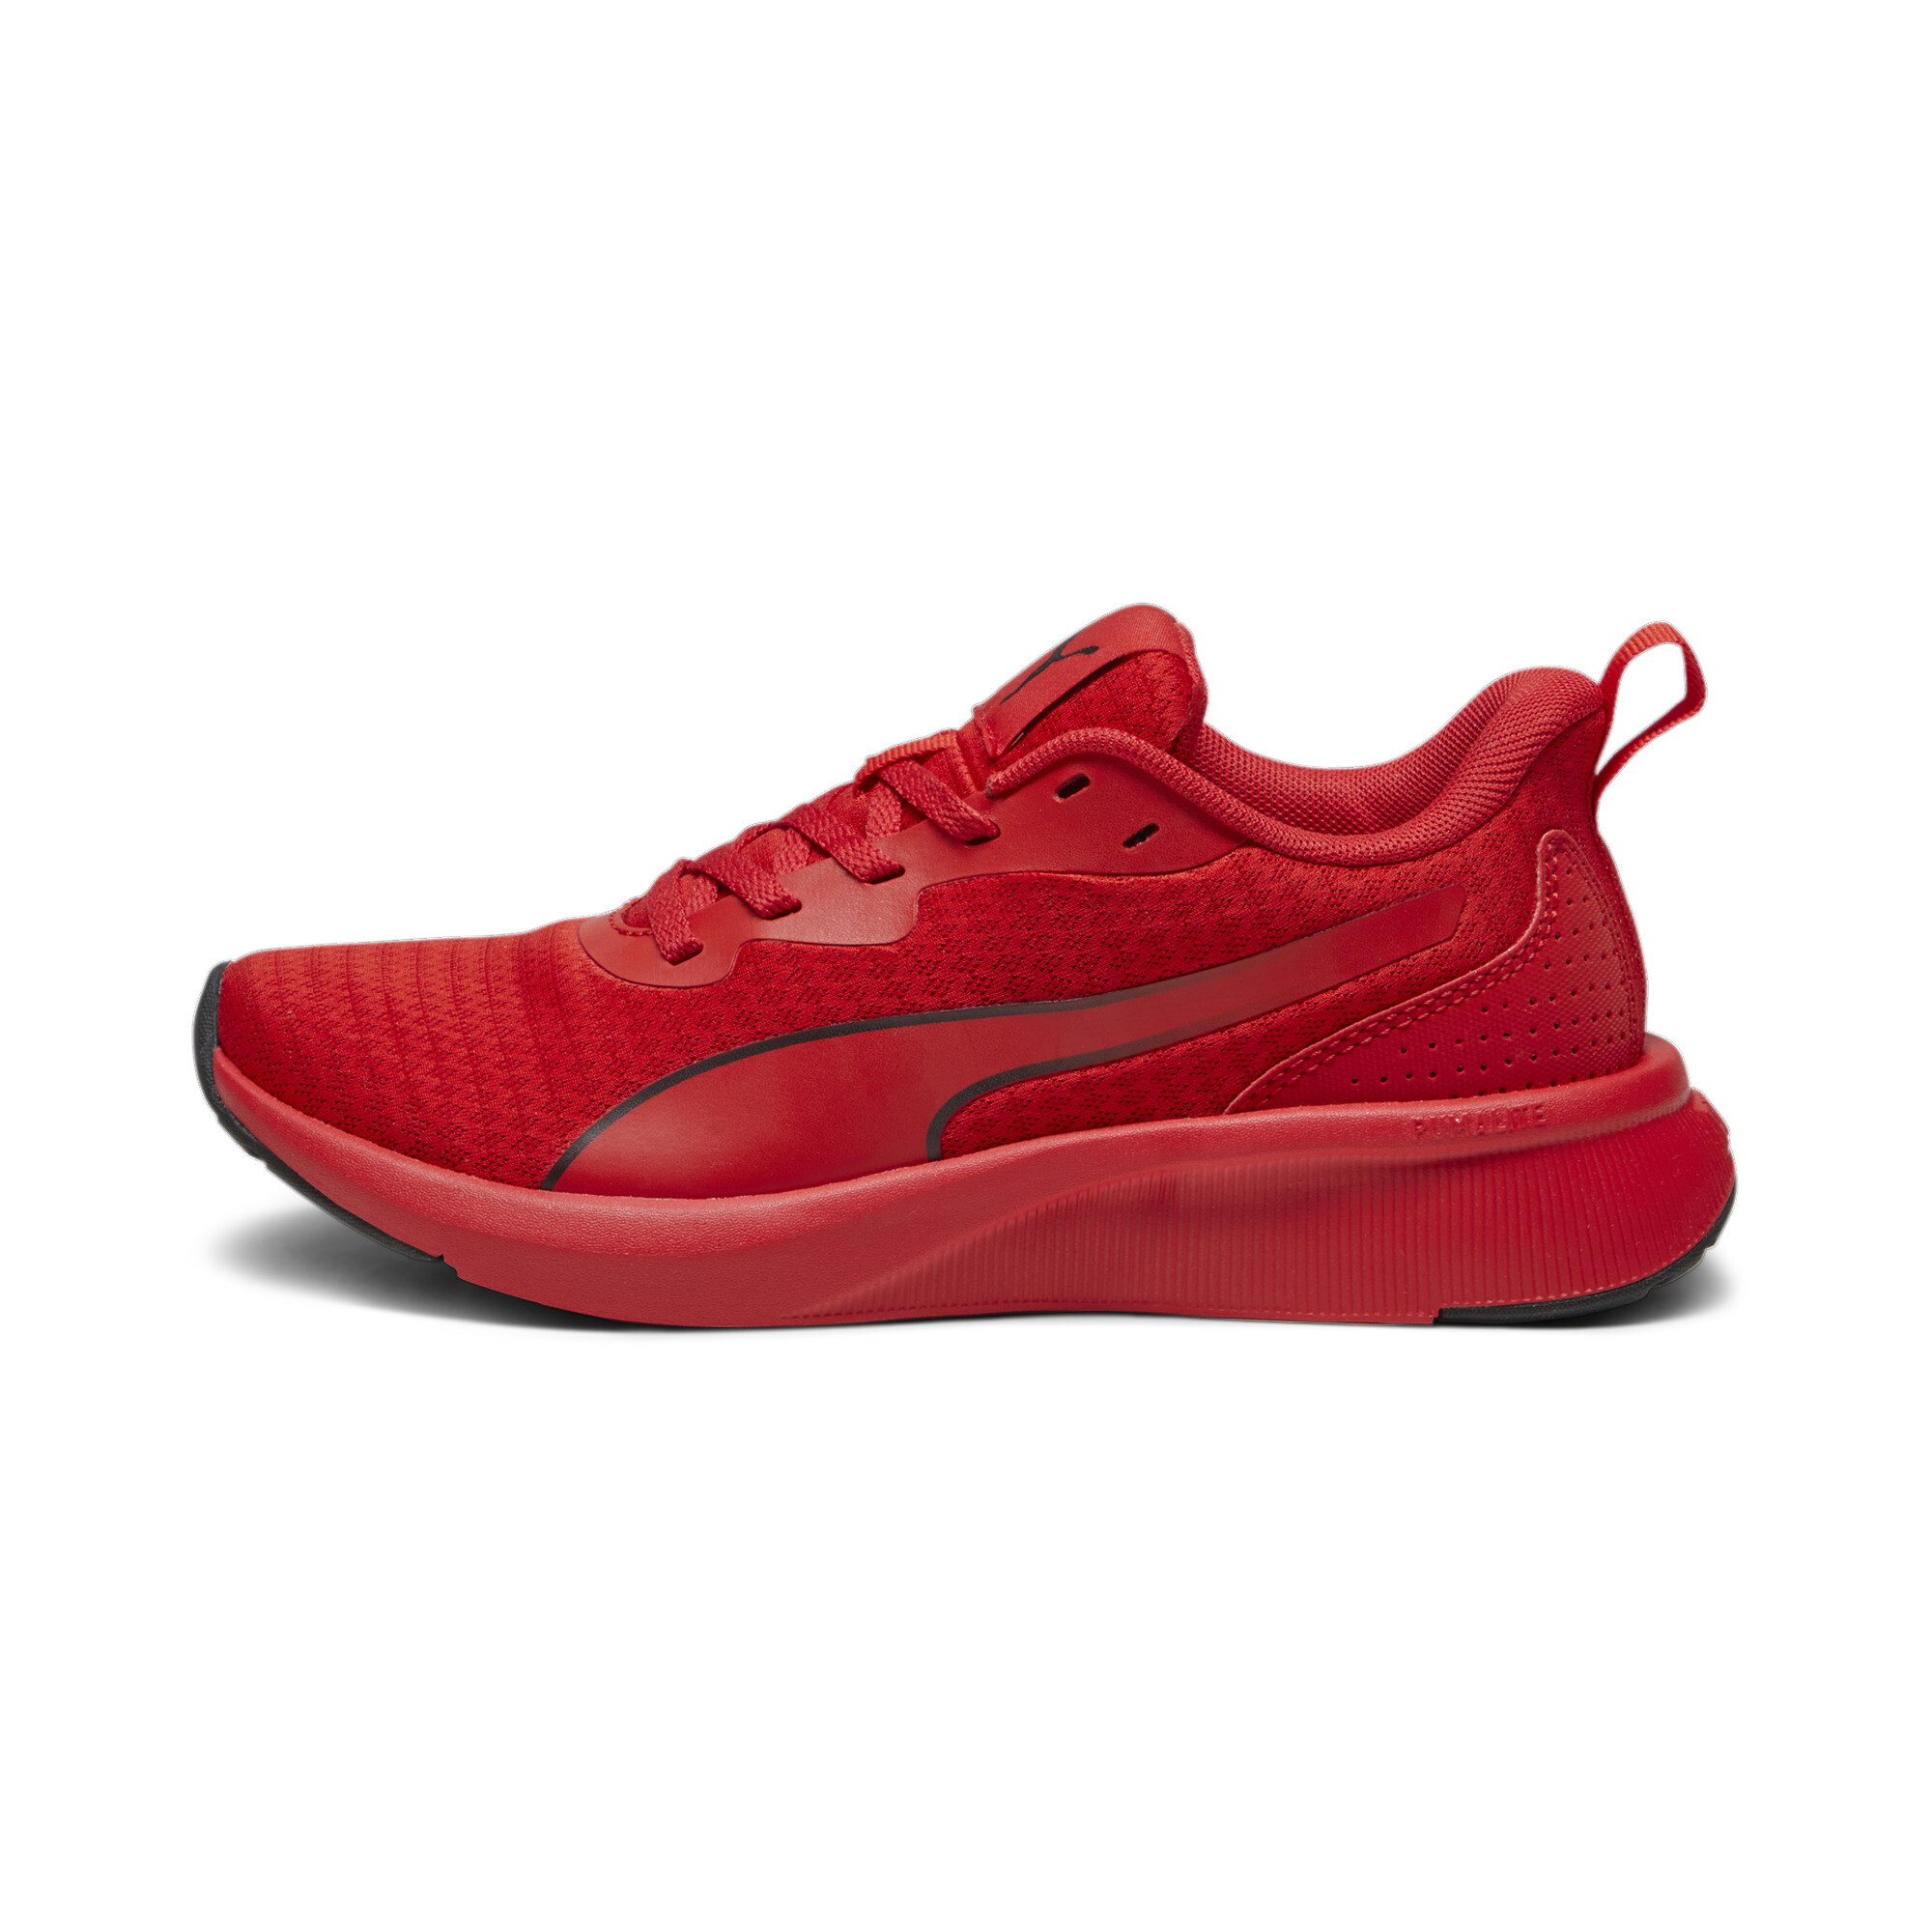 Puma Flyer Lite Youth Sneakers, Red, Size 37.5, Shoes